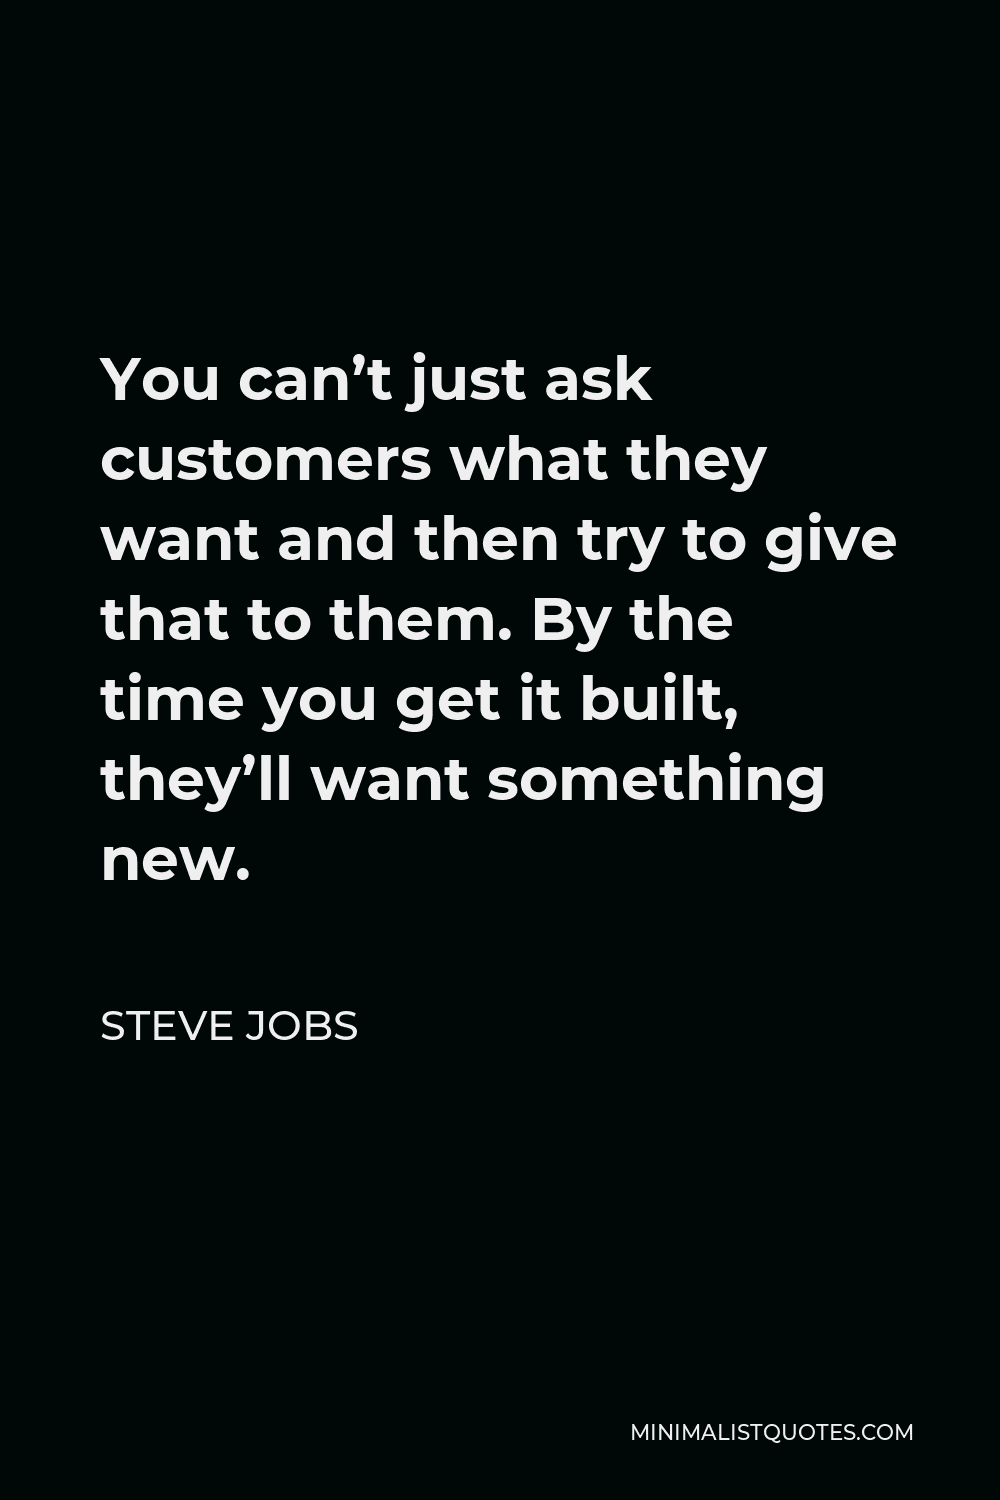 Steve Jobs Quote - You can’t just ask customers what they want and then try to give that to them. By the time you get it built, they’ll want something new.